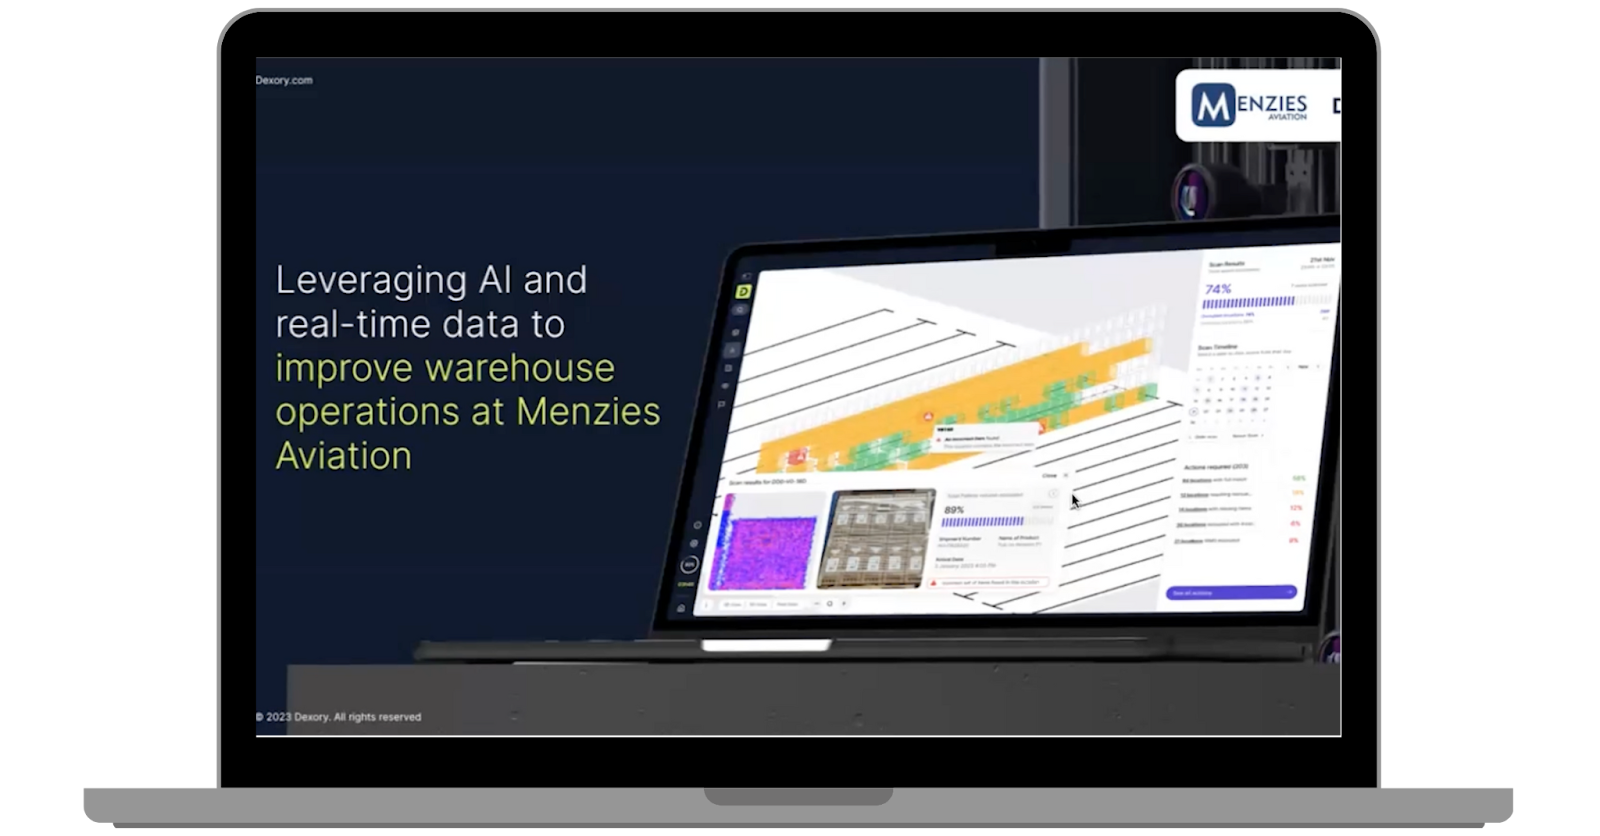 Webinar on Leveraging AI and real-time data to improve warehouse operations at Menzies Aviation